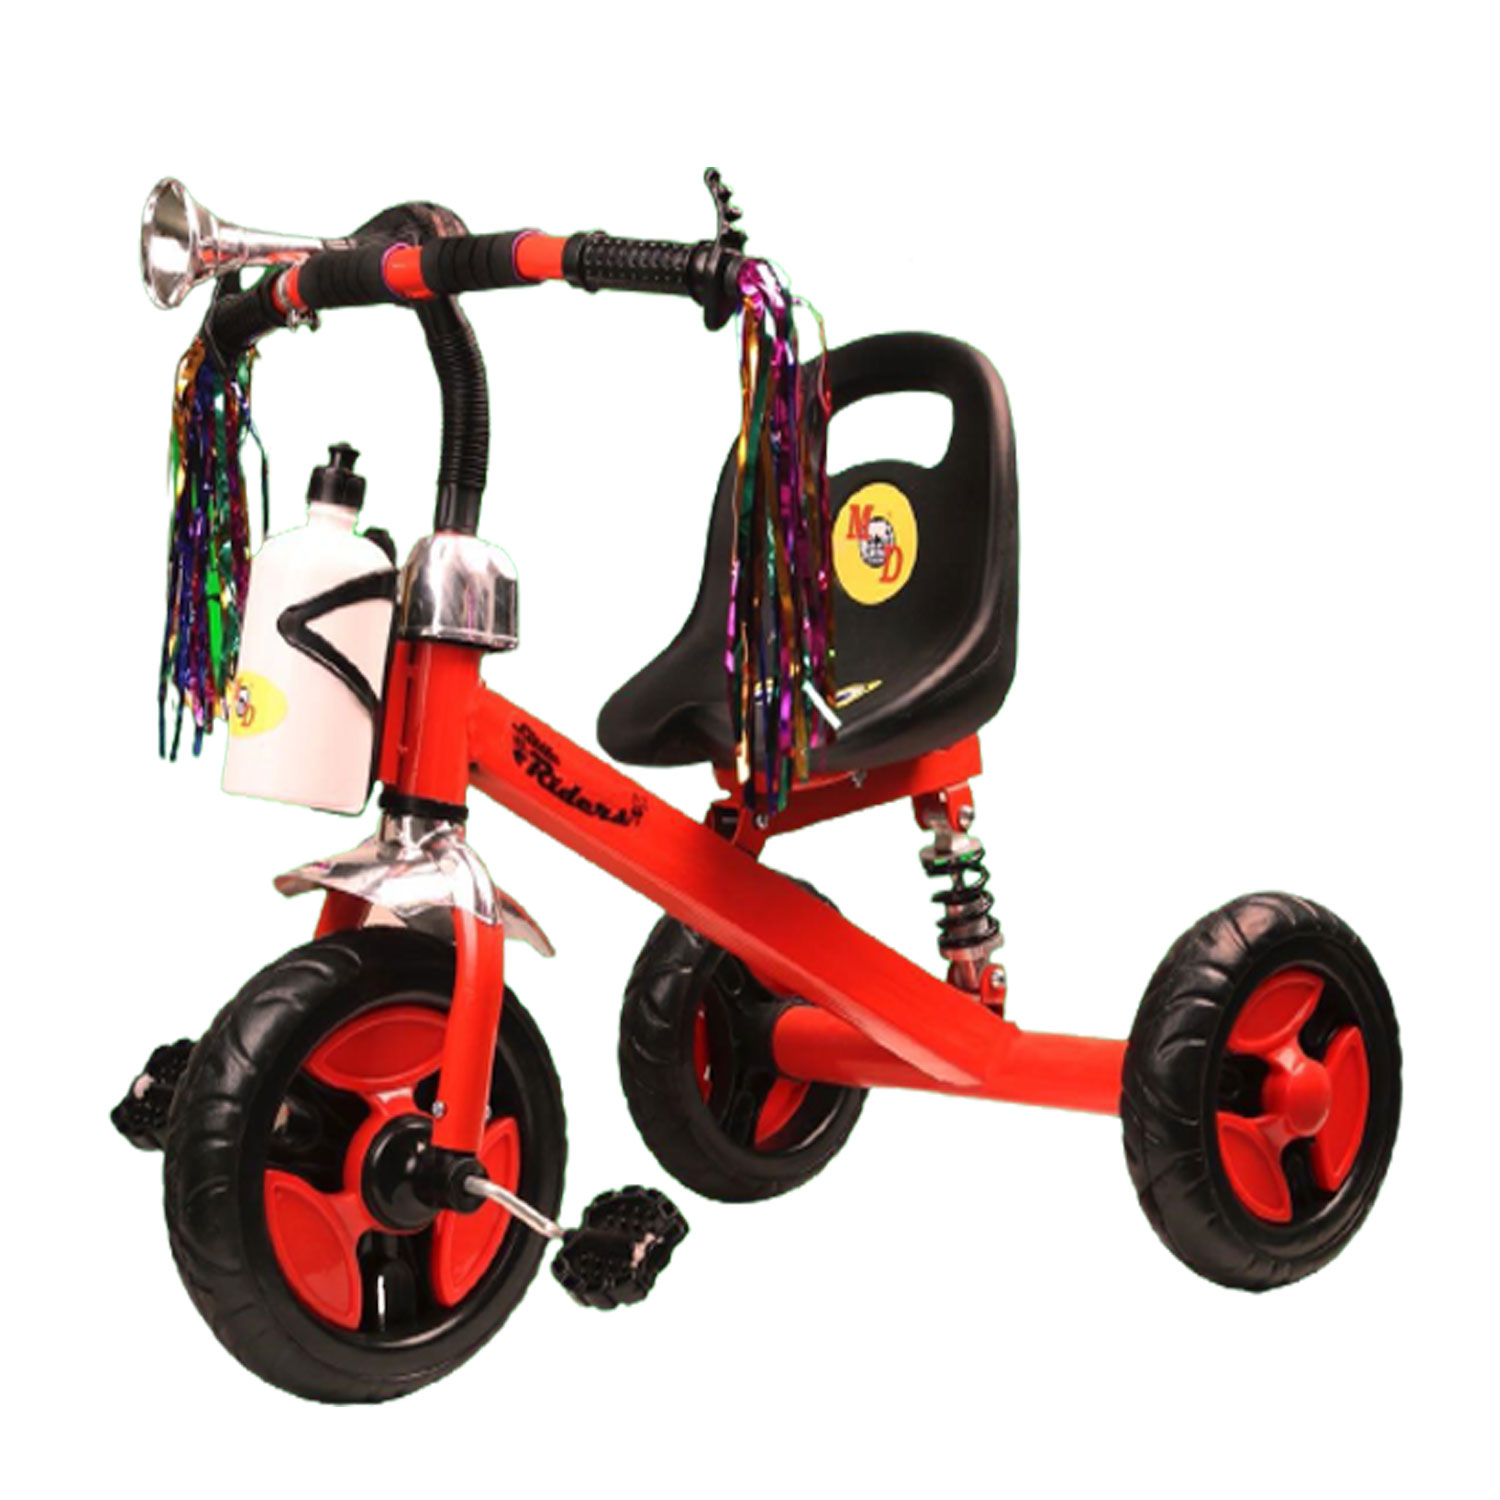 NAVRANGI BABY TRICYCLE FOR KIDS WITH FRONT OR BACK BASKET. TRICYCLE FOR KIDS  MD-103 